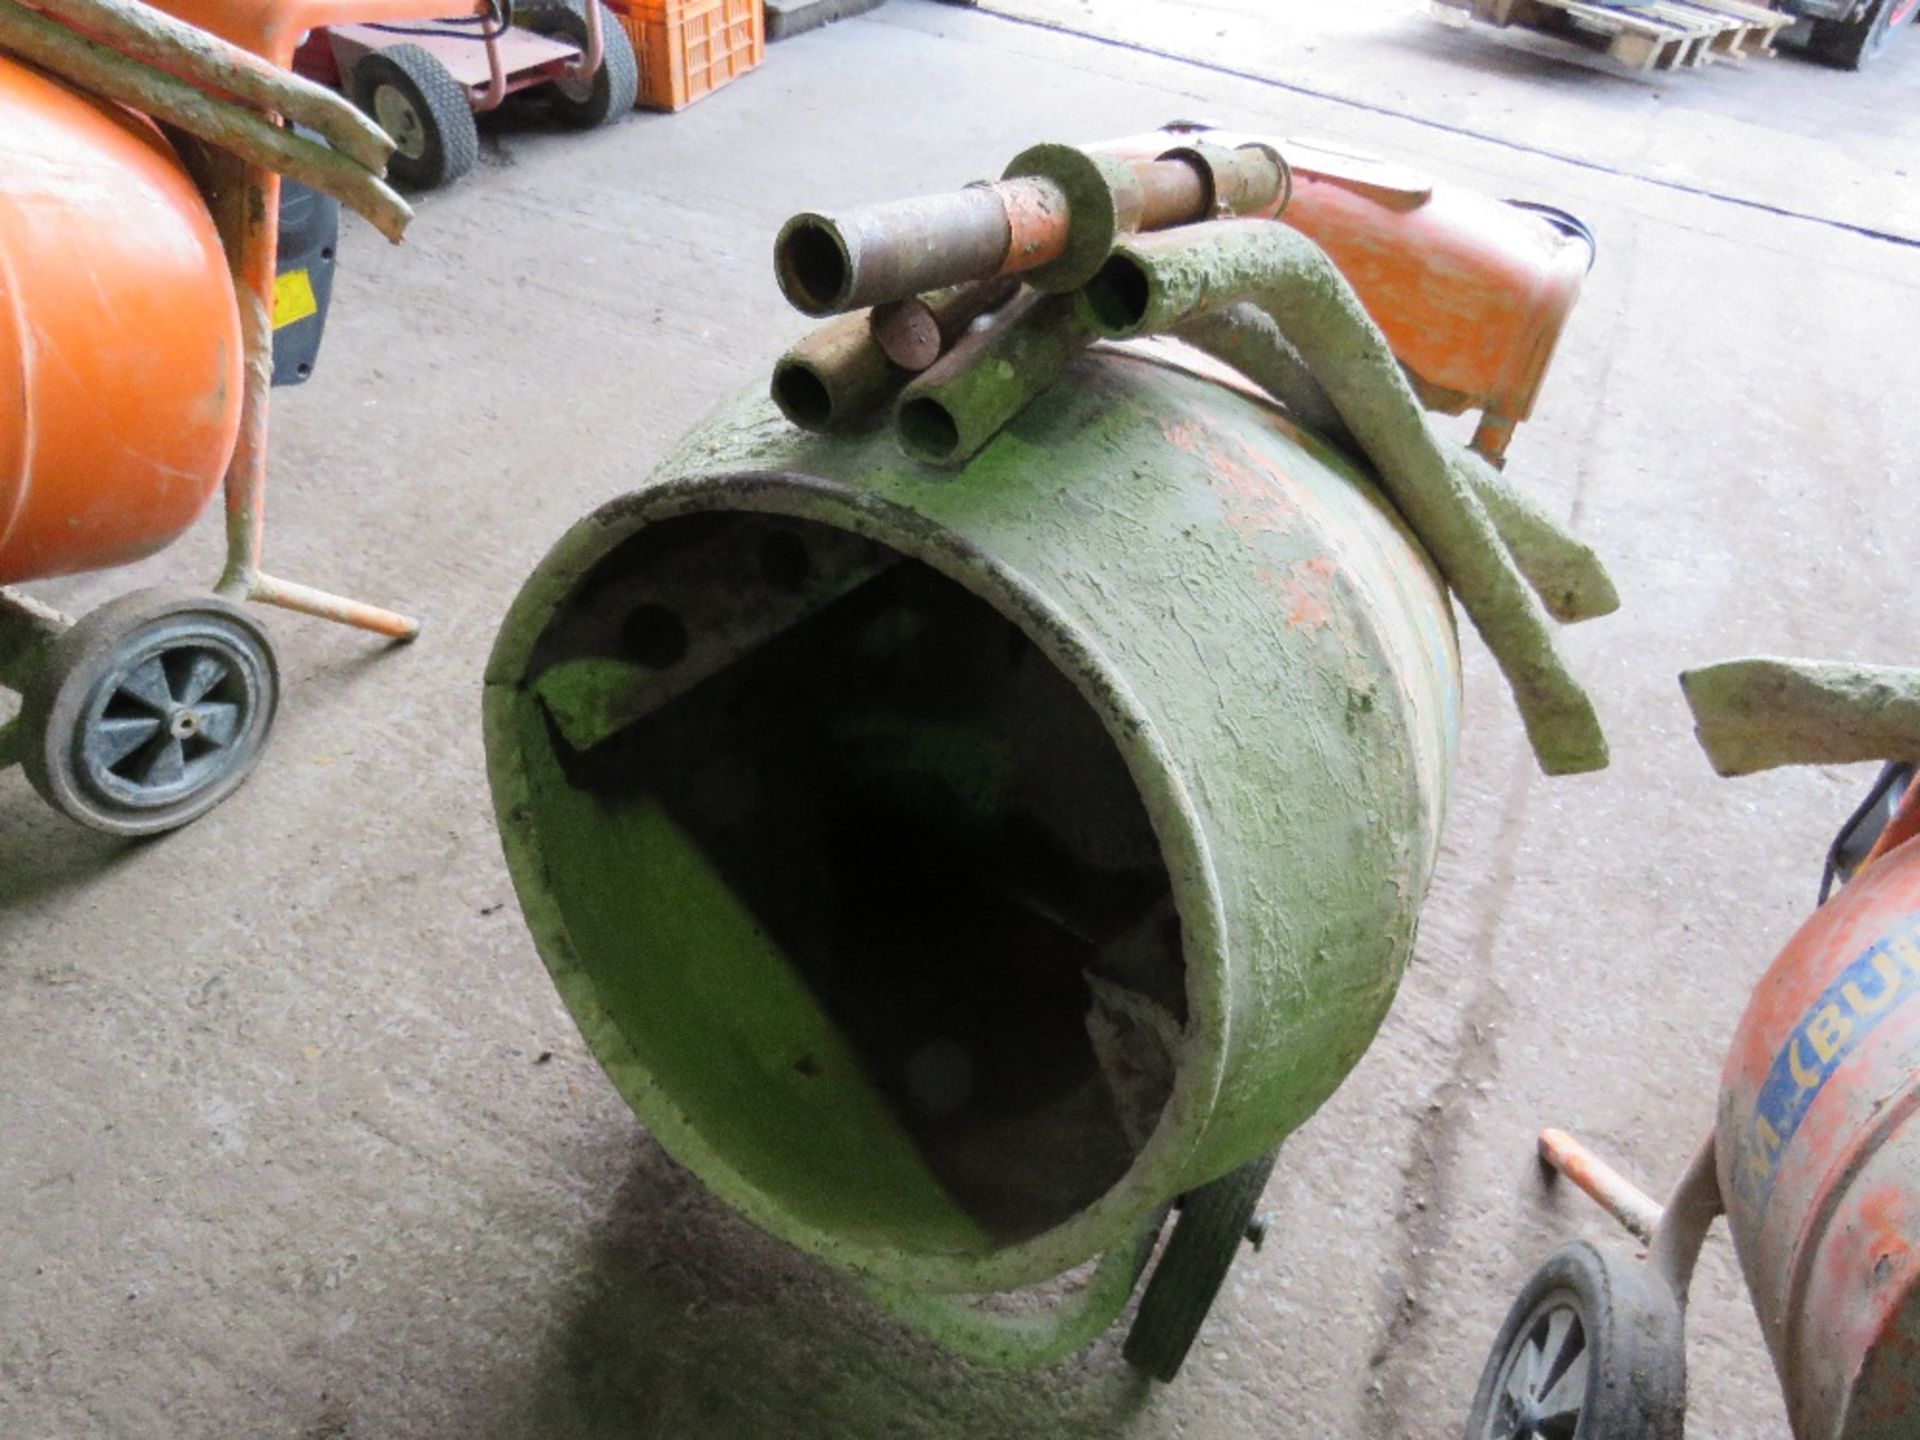 BELLE MINI CEMENT MIXER WITH STAND, 240VOLT POWERED. NO VAT ON HAMMER PRICE - Image 3 of 4